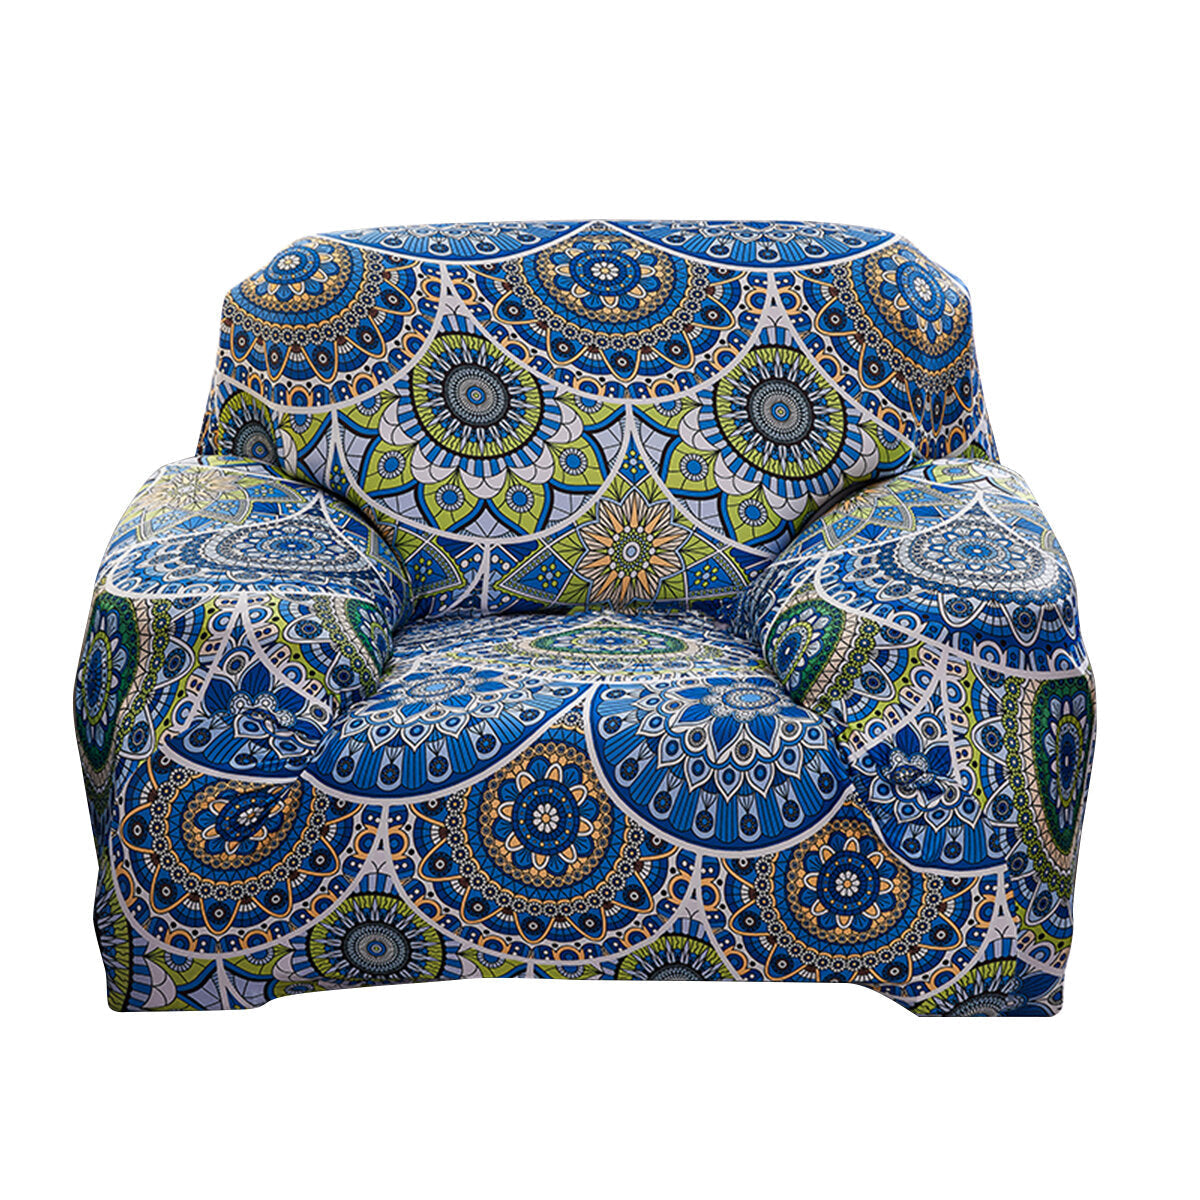 1/2/3/4 Seaters Elastic Sofa Cover Bohemian Digital Printing Chair Seat Protector Stretch Couch Slipcover Home Office Furniture Accessories Decorations